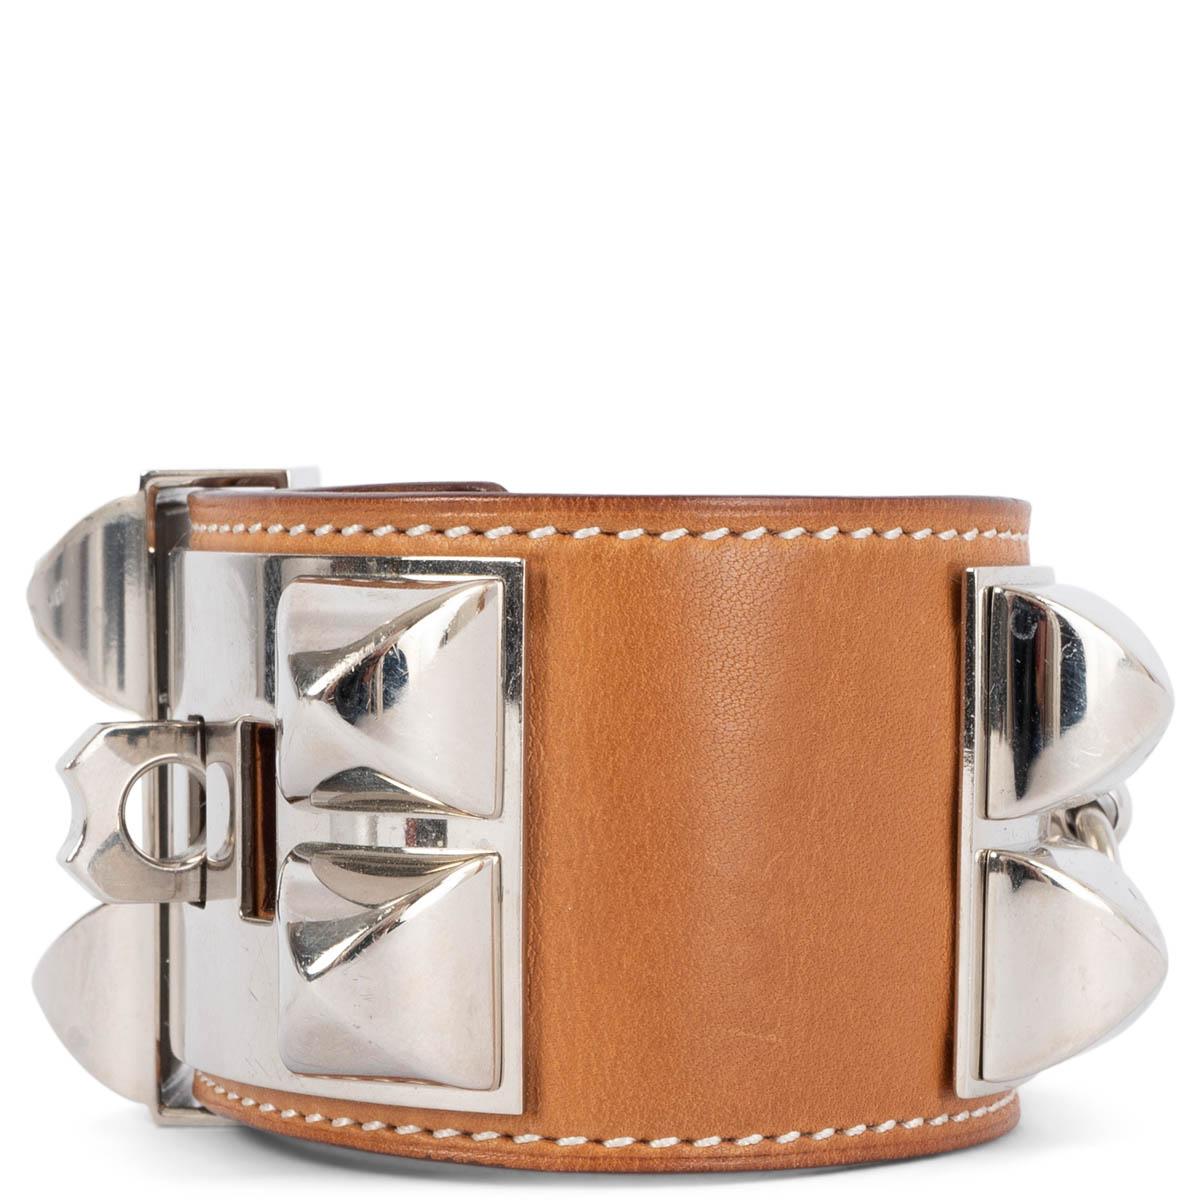 100% authentic Hermès Collier de Chien bracelet in Fauve (cognac) Veau Barnia leather with Palladium hardware. Has been worn and shows an overall natural patenia to the leather and faint scratches to the hardware.

Measurements
Tag